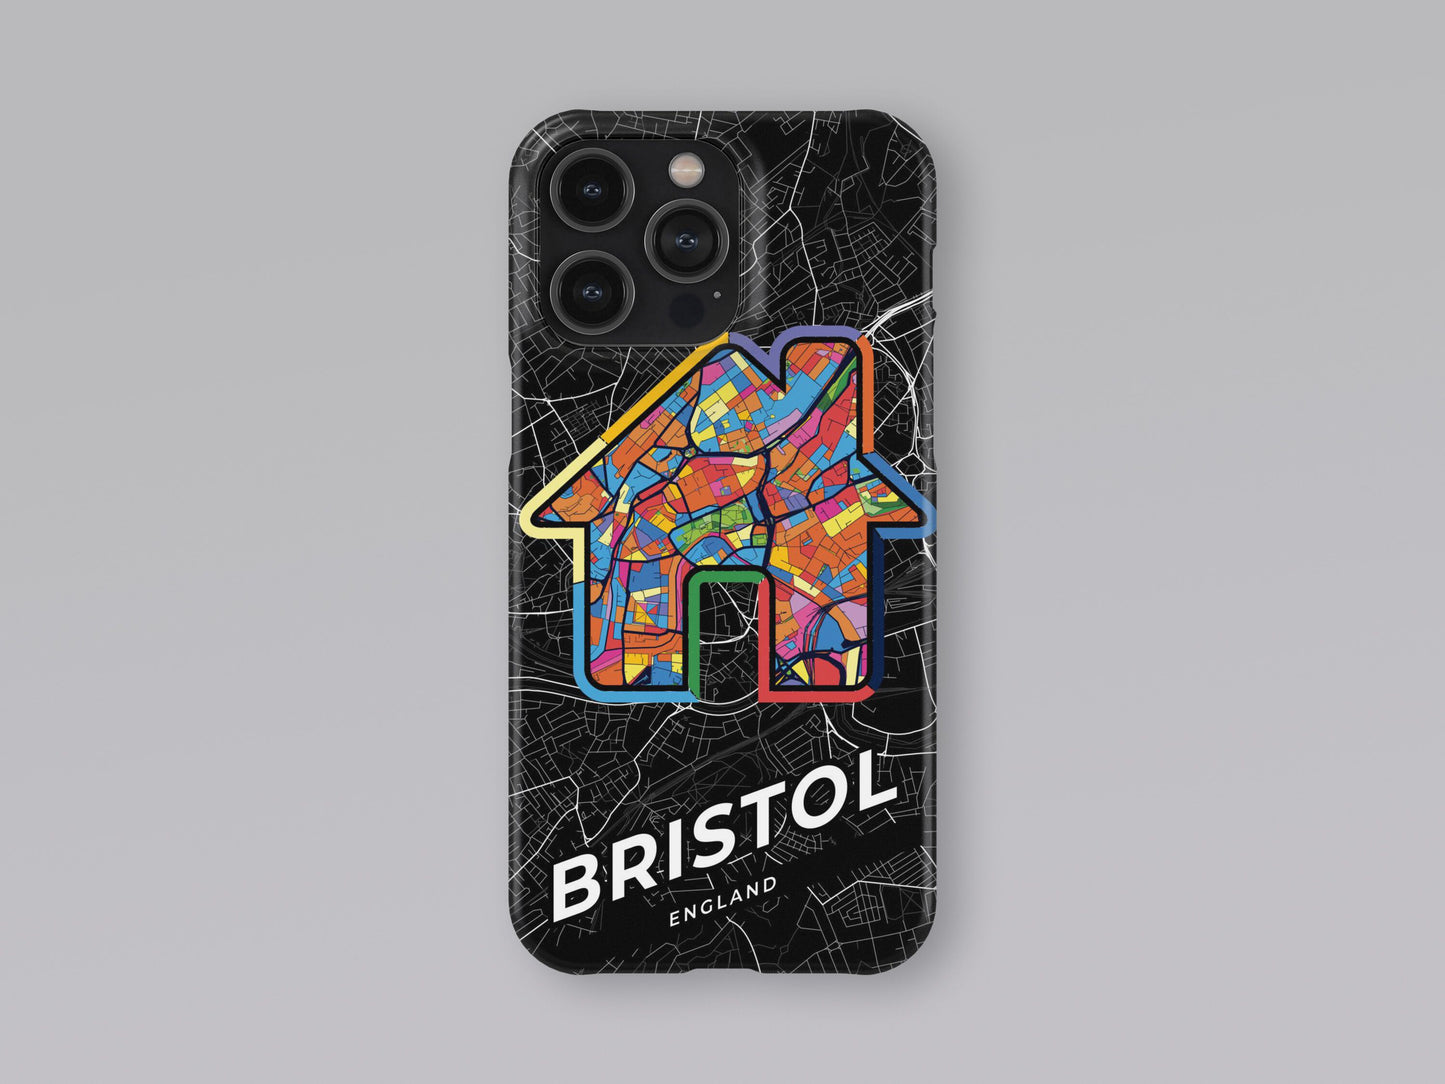 Bristol England slim phone case with colorful icon. Birthday, wedding or housewarming gift. Couple match cases. 3